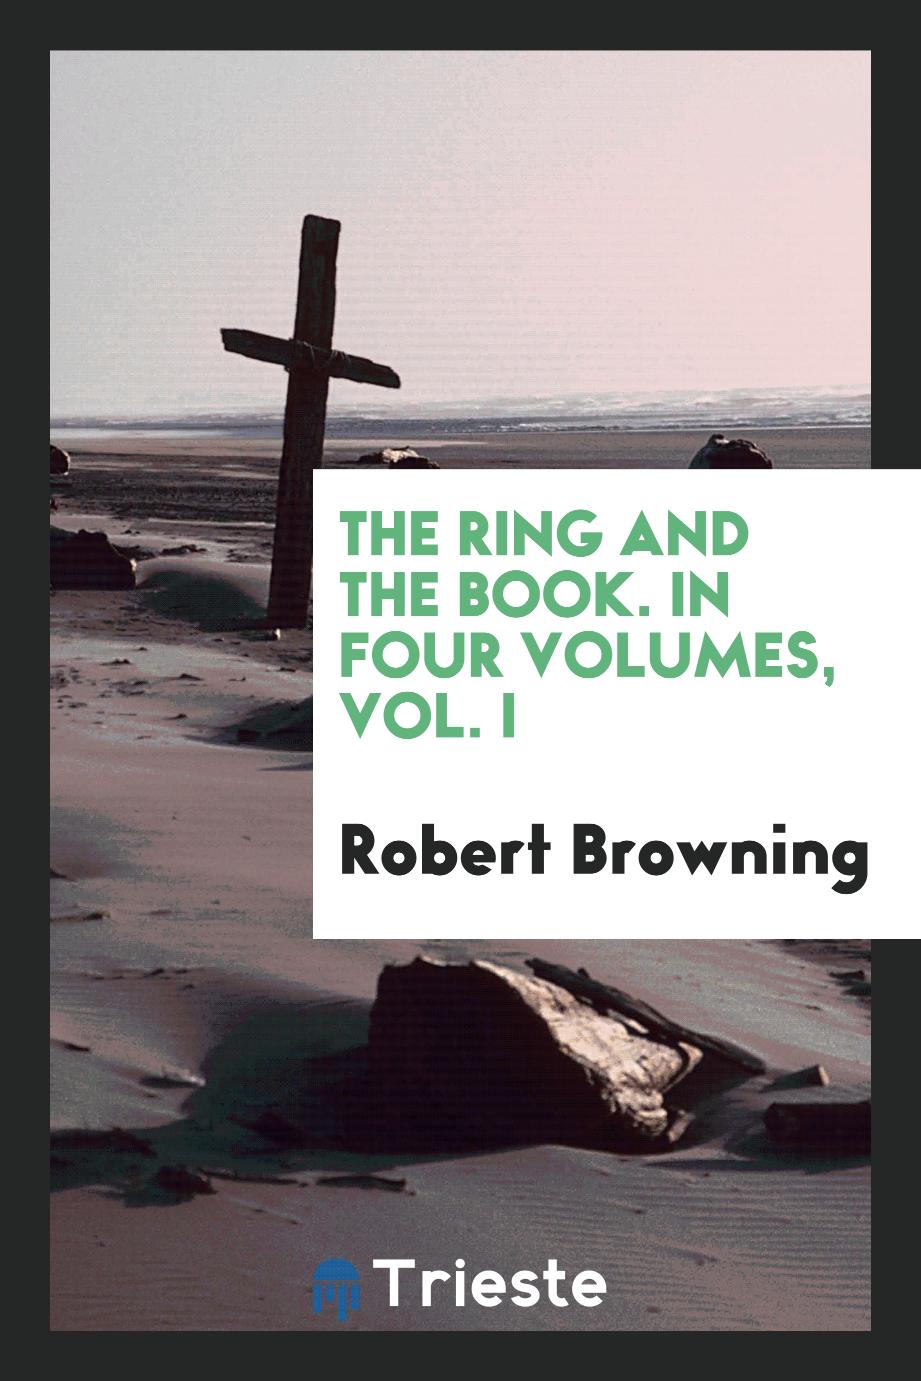 The ring and the book. In four Volumes, Vol. I